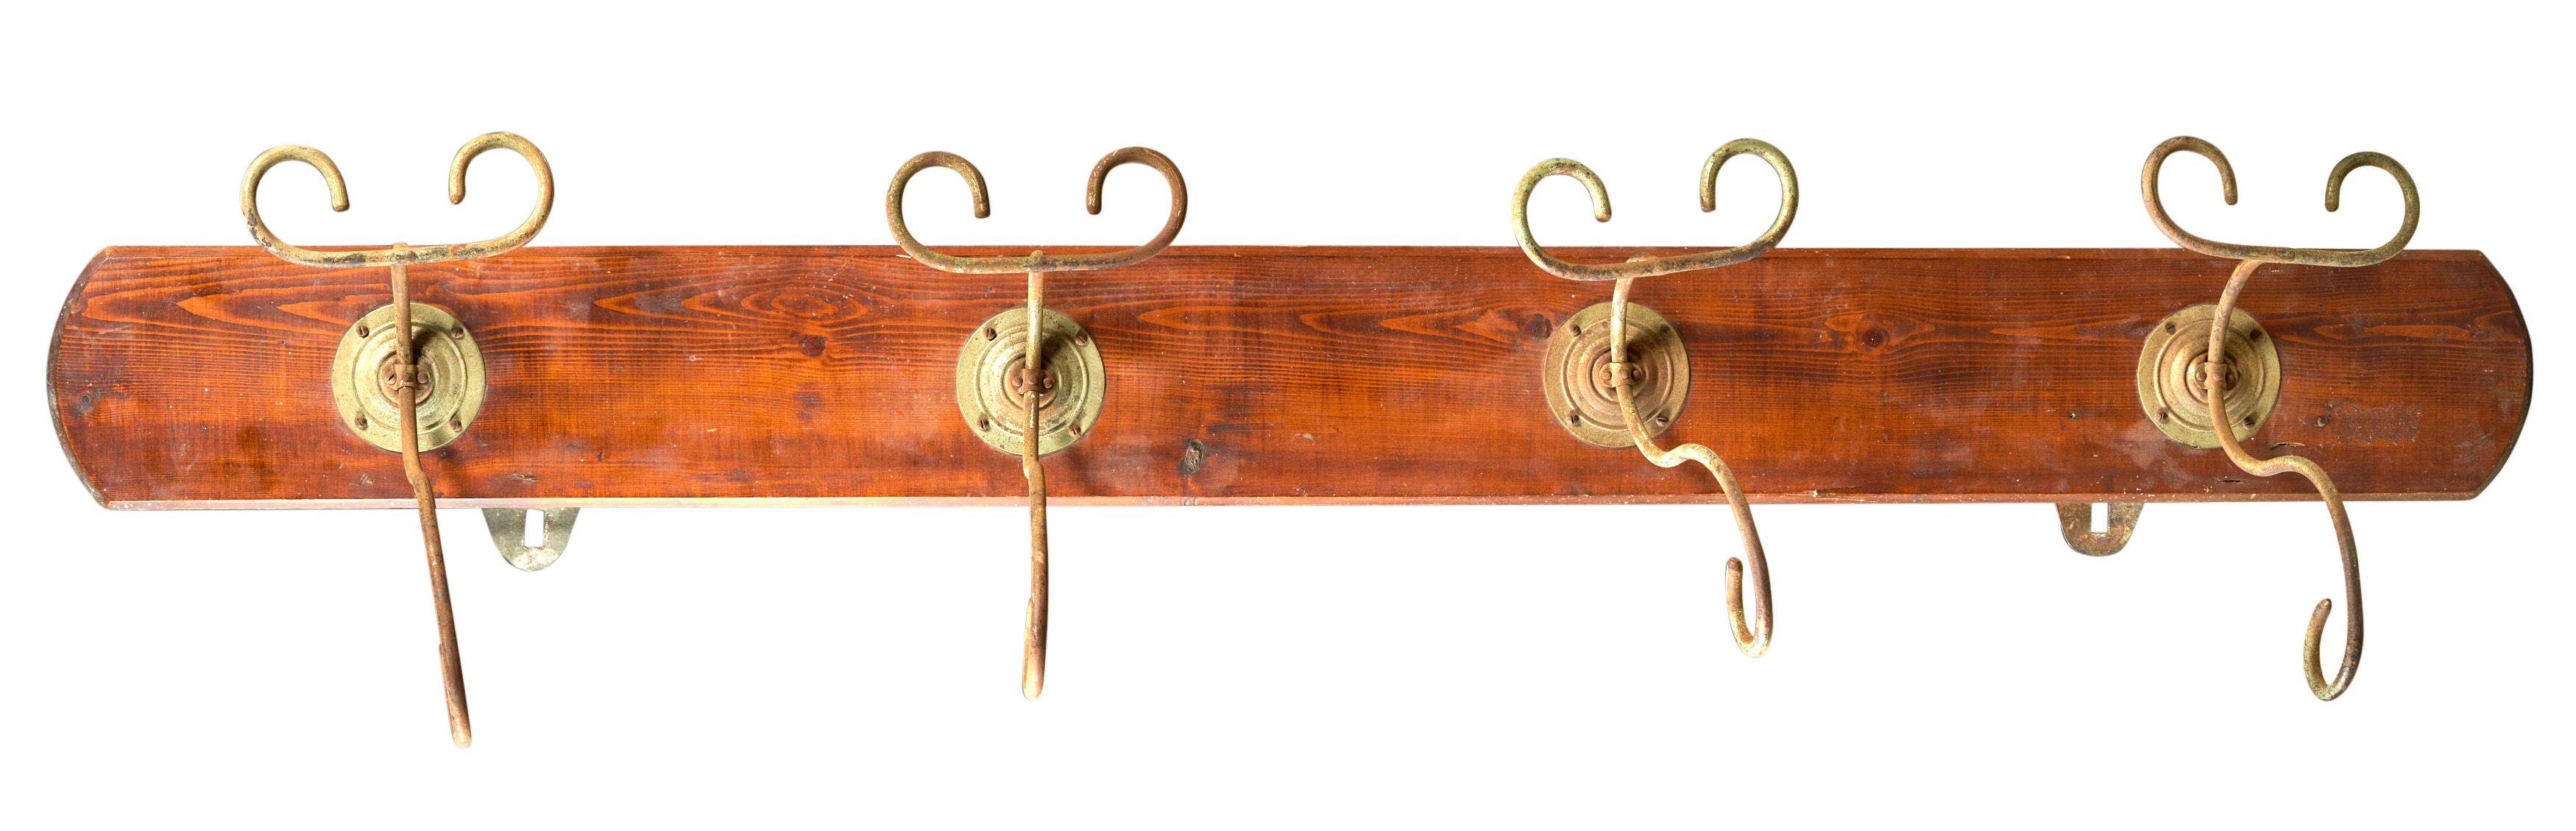 Early 20th Century Wrought Iron Four Hook Coat/Hat Rack For Sale